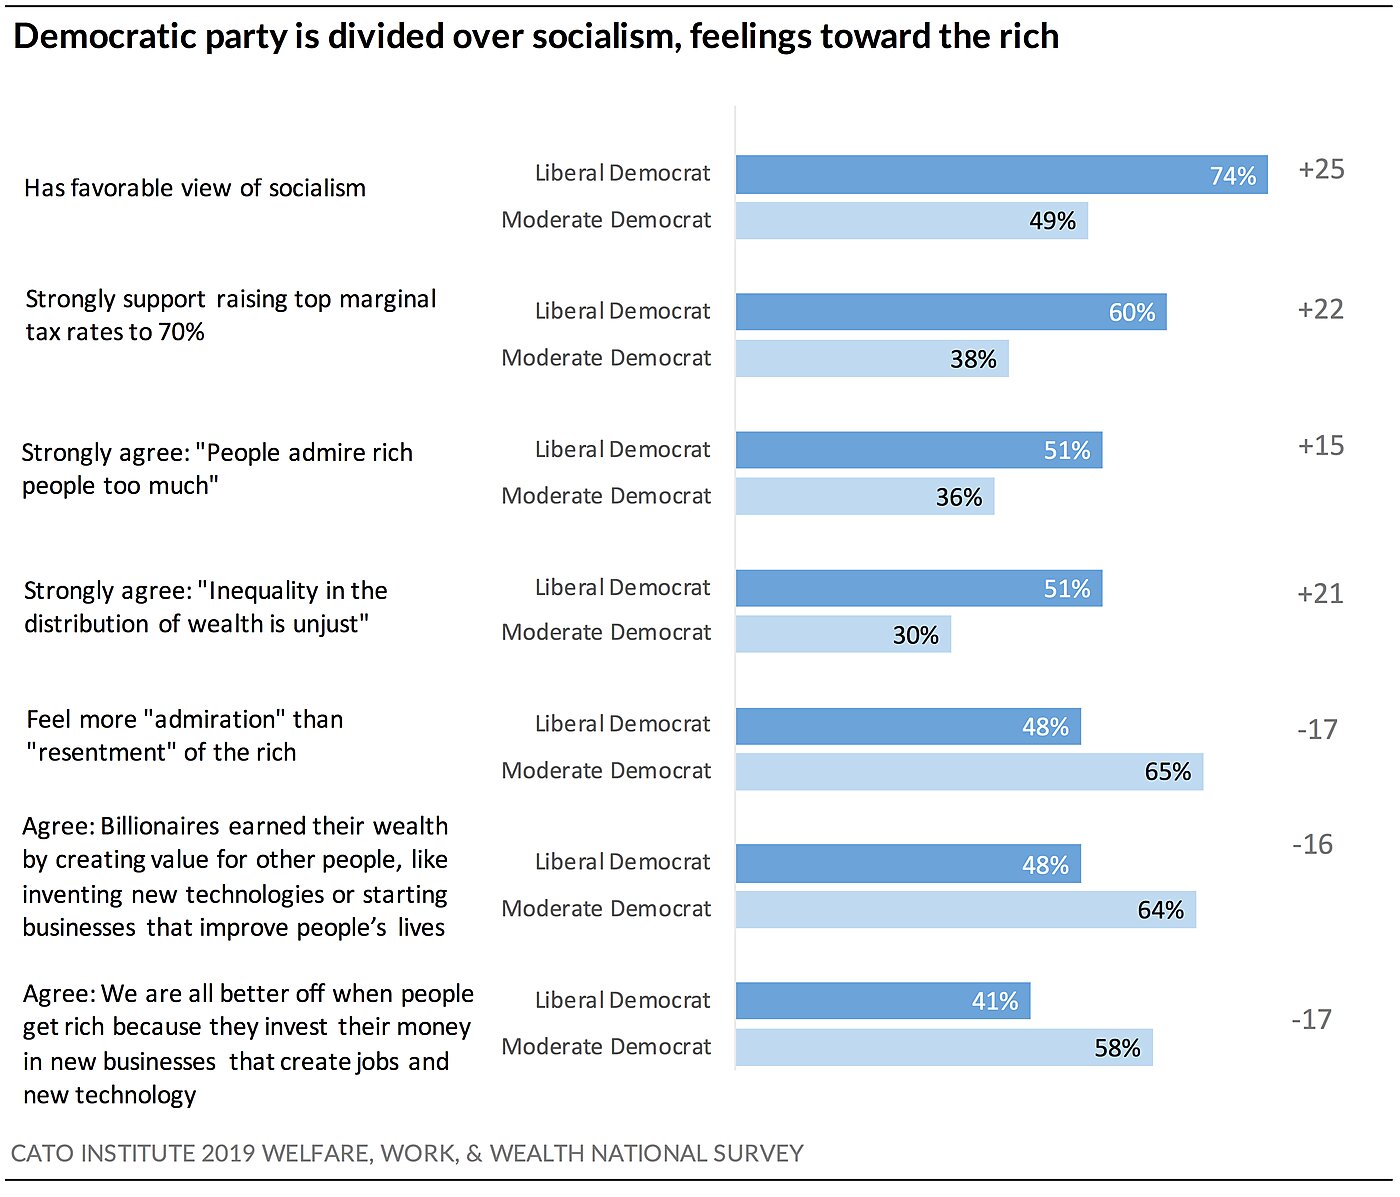 Democratic party divided over socialism, feelings toward the rich